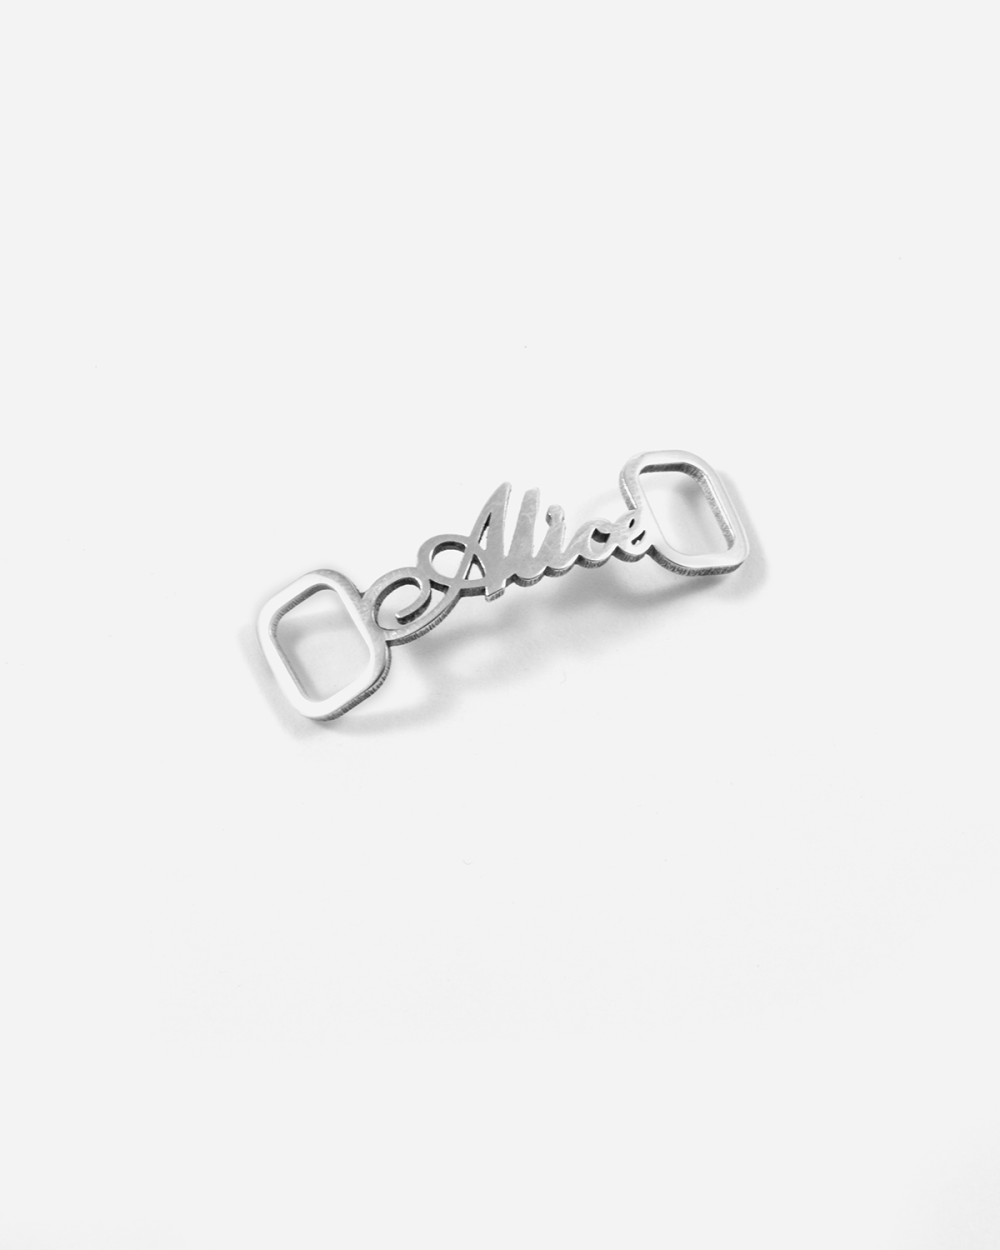 NAME SNEAKER LACE TAG